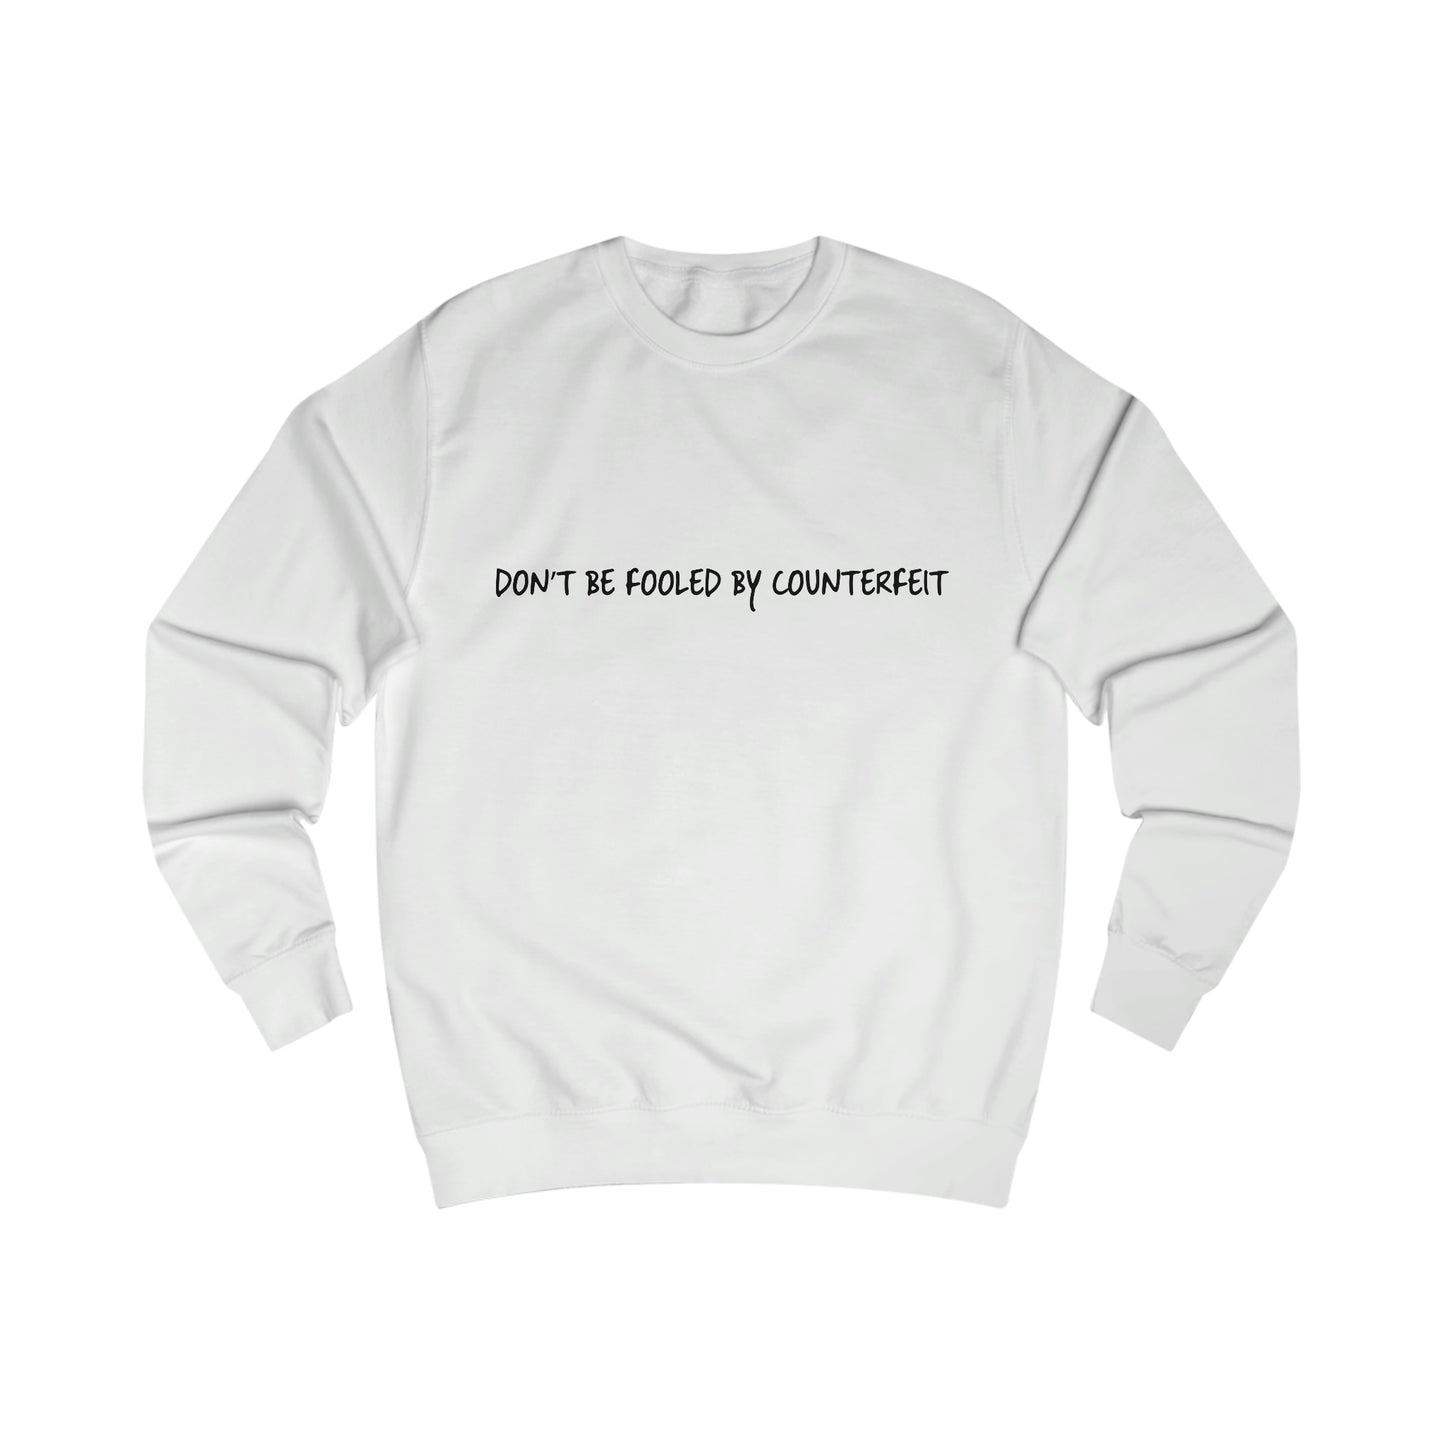 DON'T BE FOOLED BY COUNTERFEIT - Men's Sweatshirt